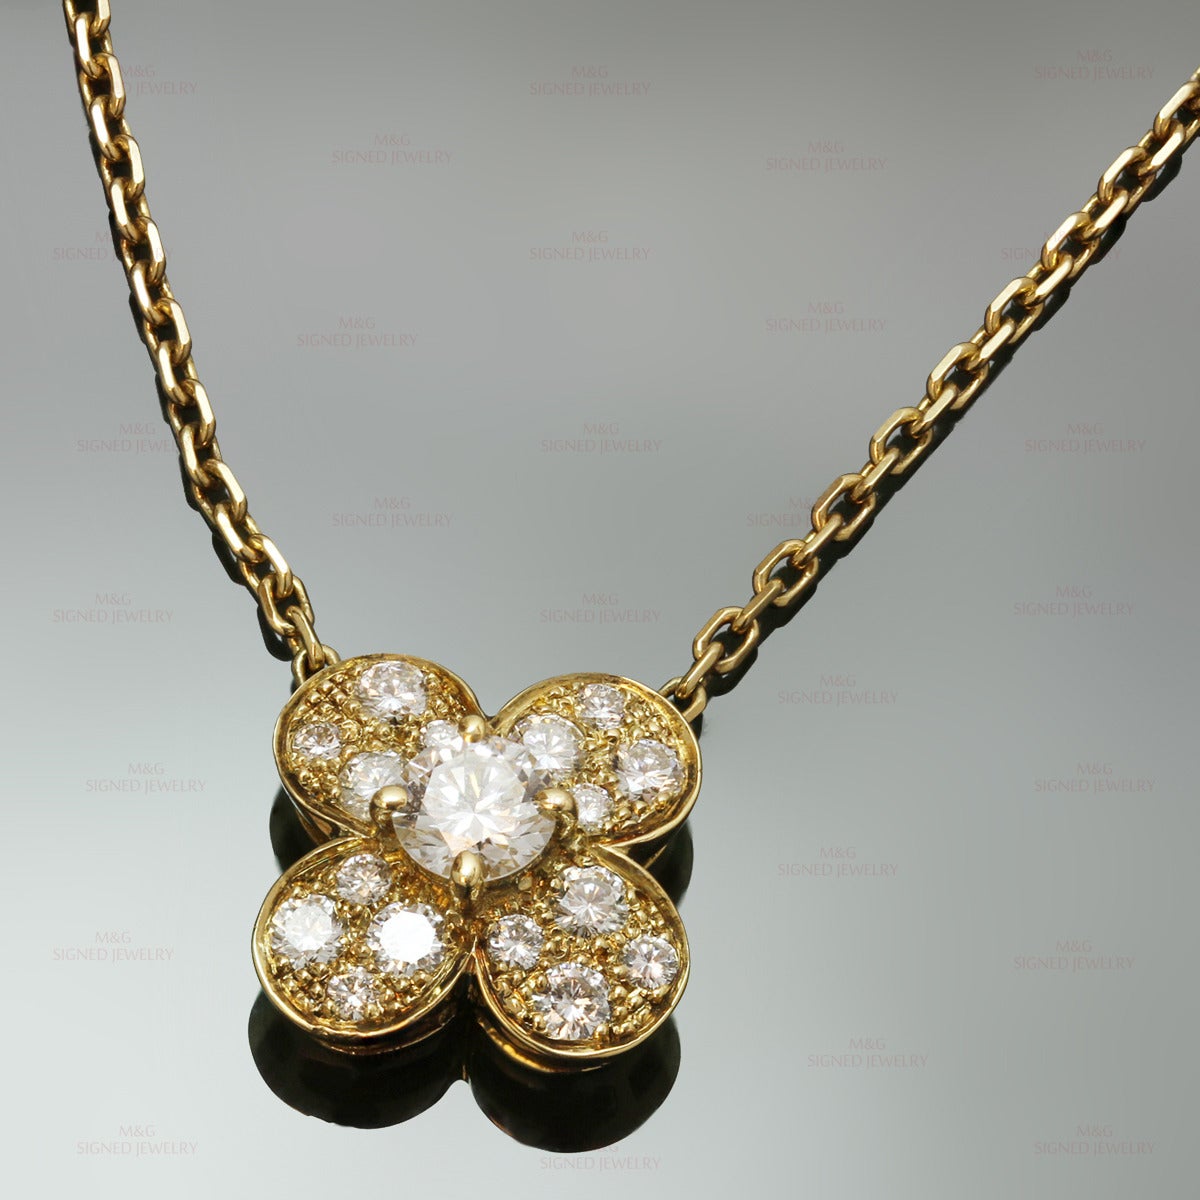 This stunning Van Cleef & Arpels necklace from the classic Alhambra collection is crafted in 18k yellow gold and features a luckly clover pendant set with brilliant-cut round E-F VVS2-VS1 diamonds of an estimated 0.50 carats. Made in France circa